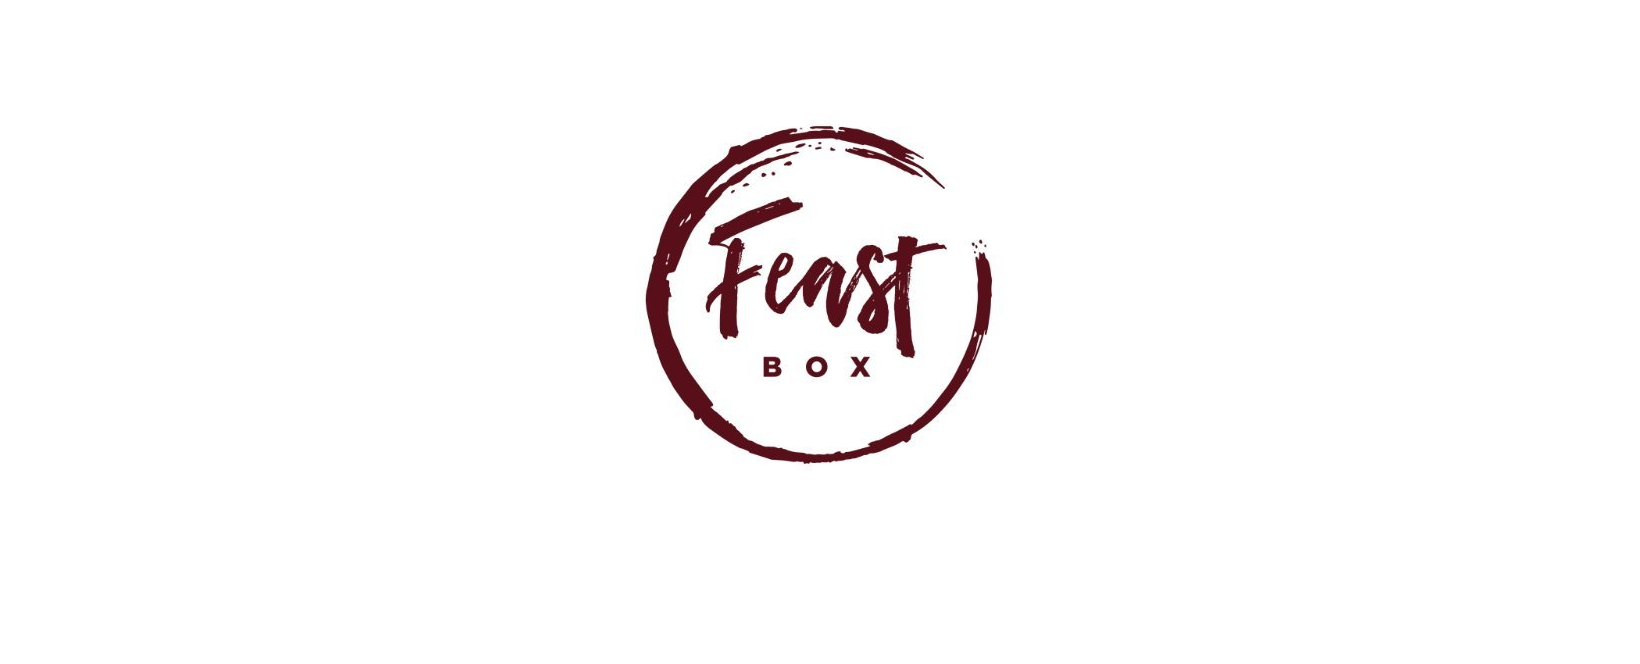 FeastBox Discount Codes 2023